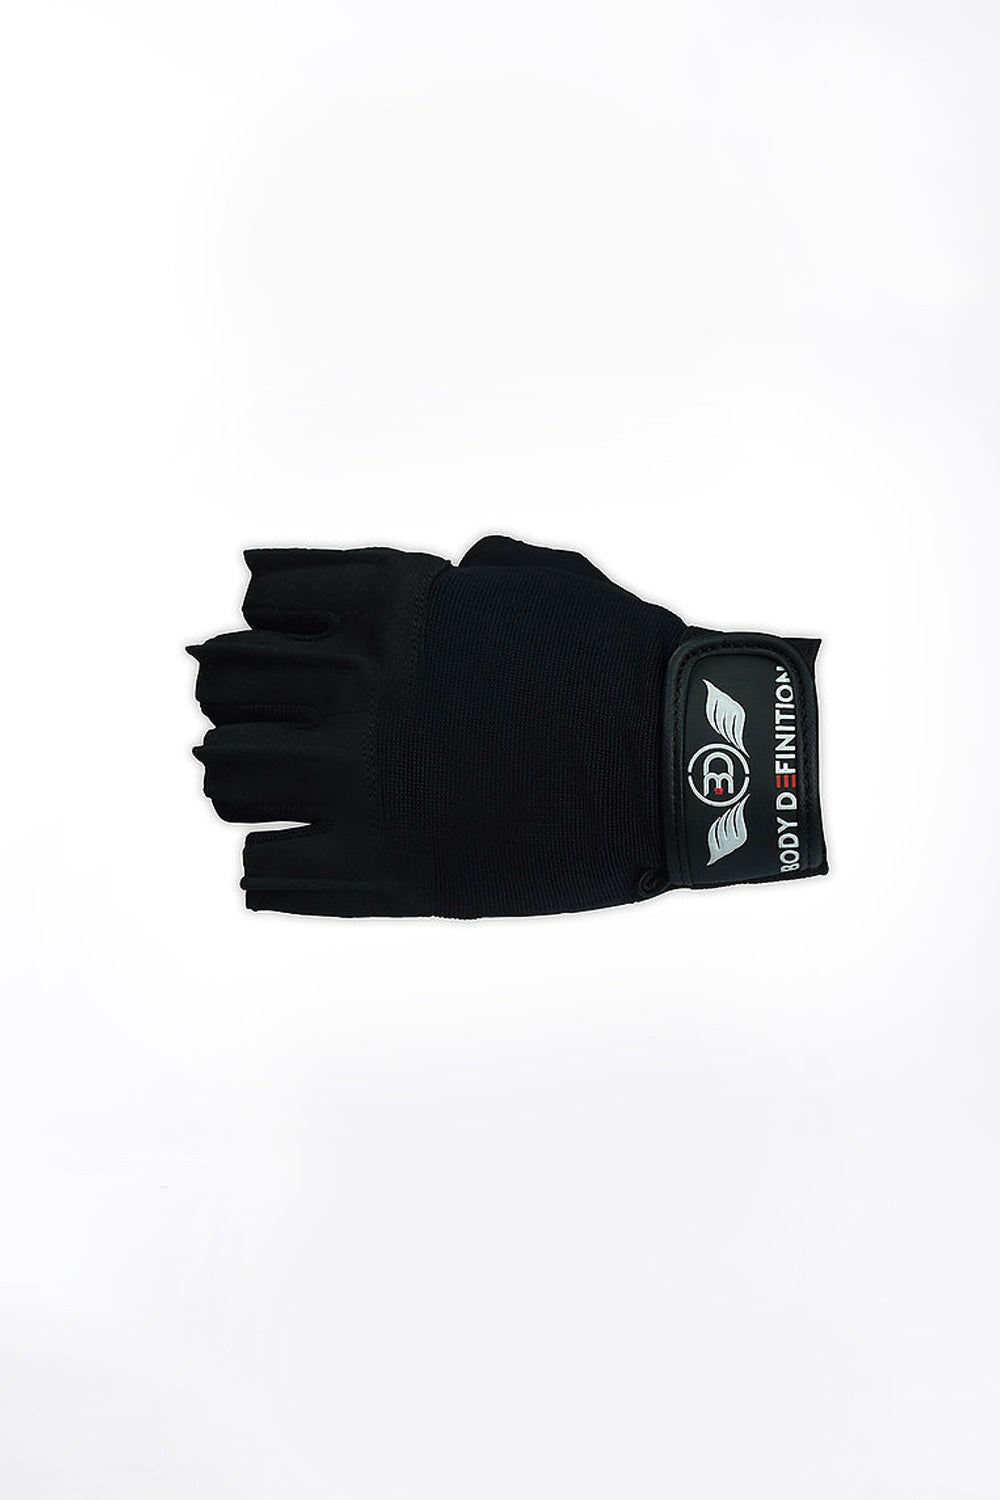 Mens Lifting Gloves With Short Straps